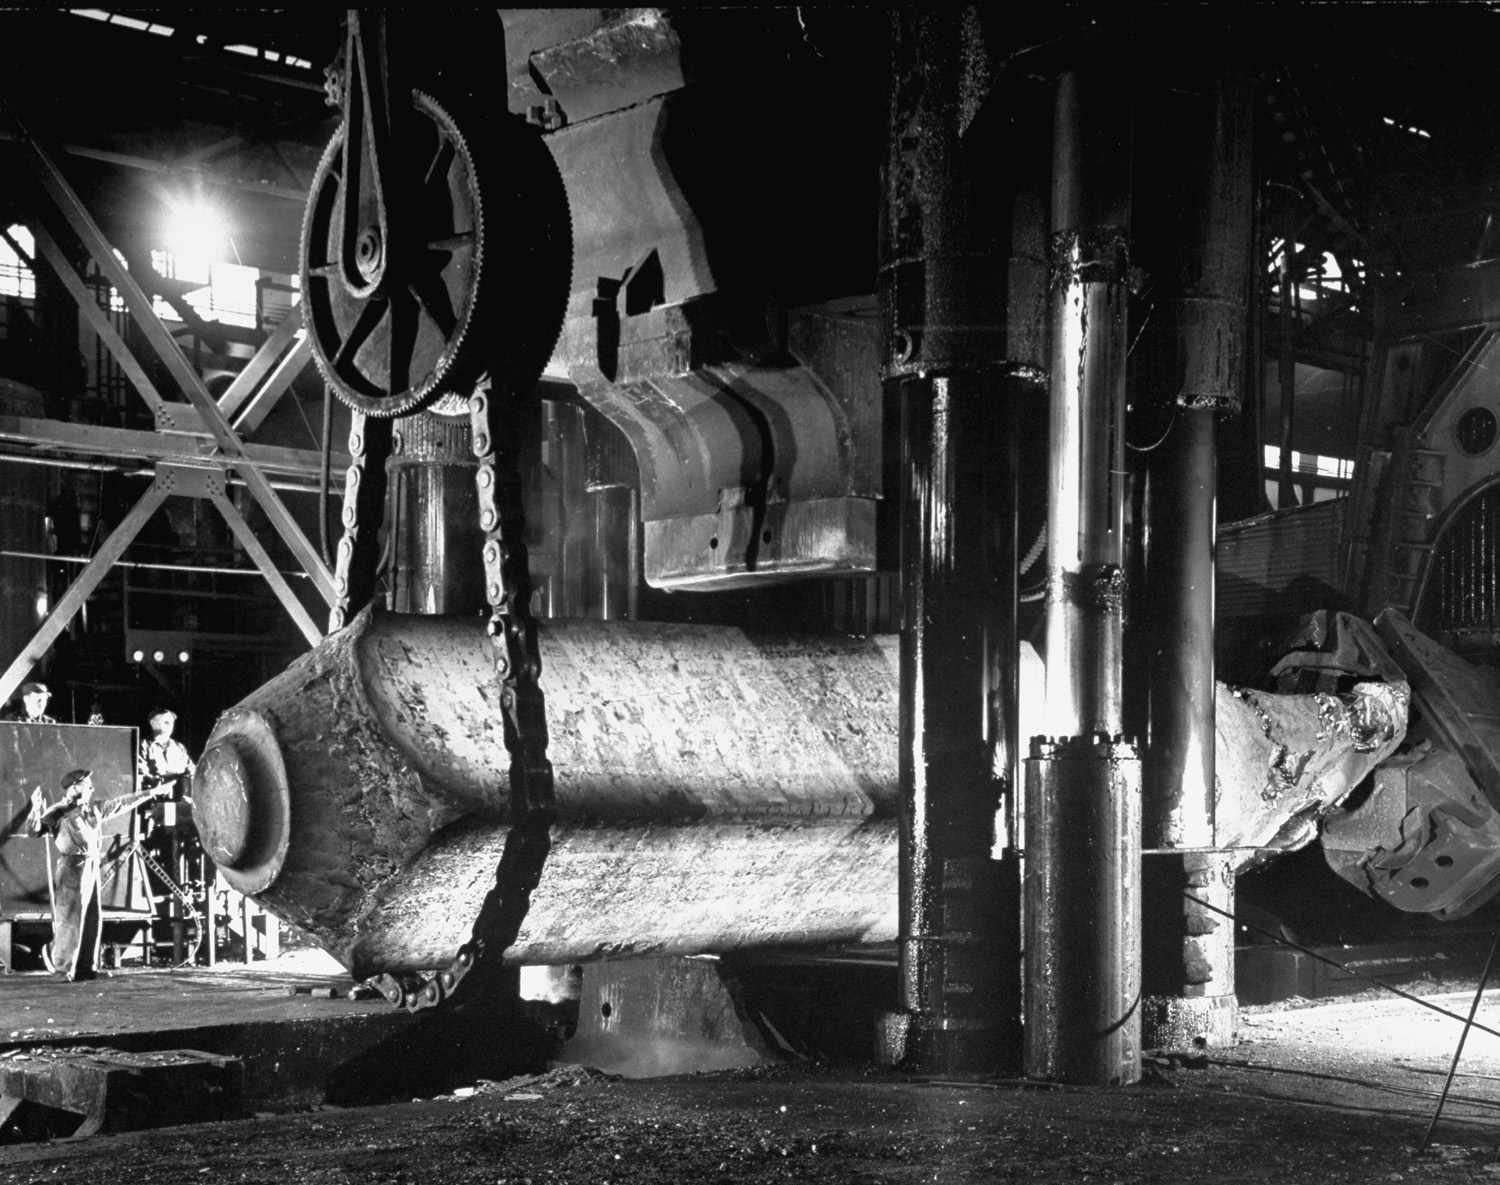 Forging of an enormous steel beam that will be carved into slabs for use in the frame of a cyclotron, Pennsylvania, 1948.